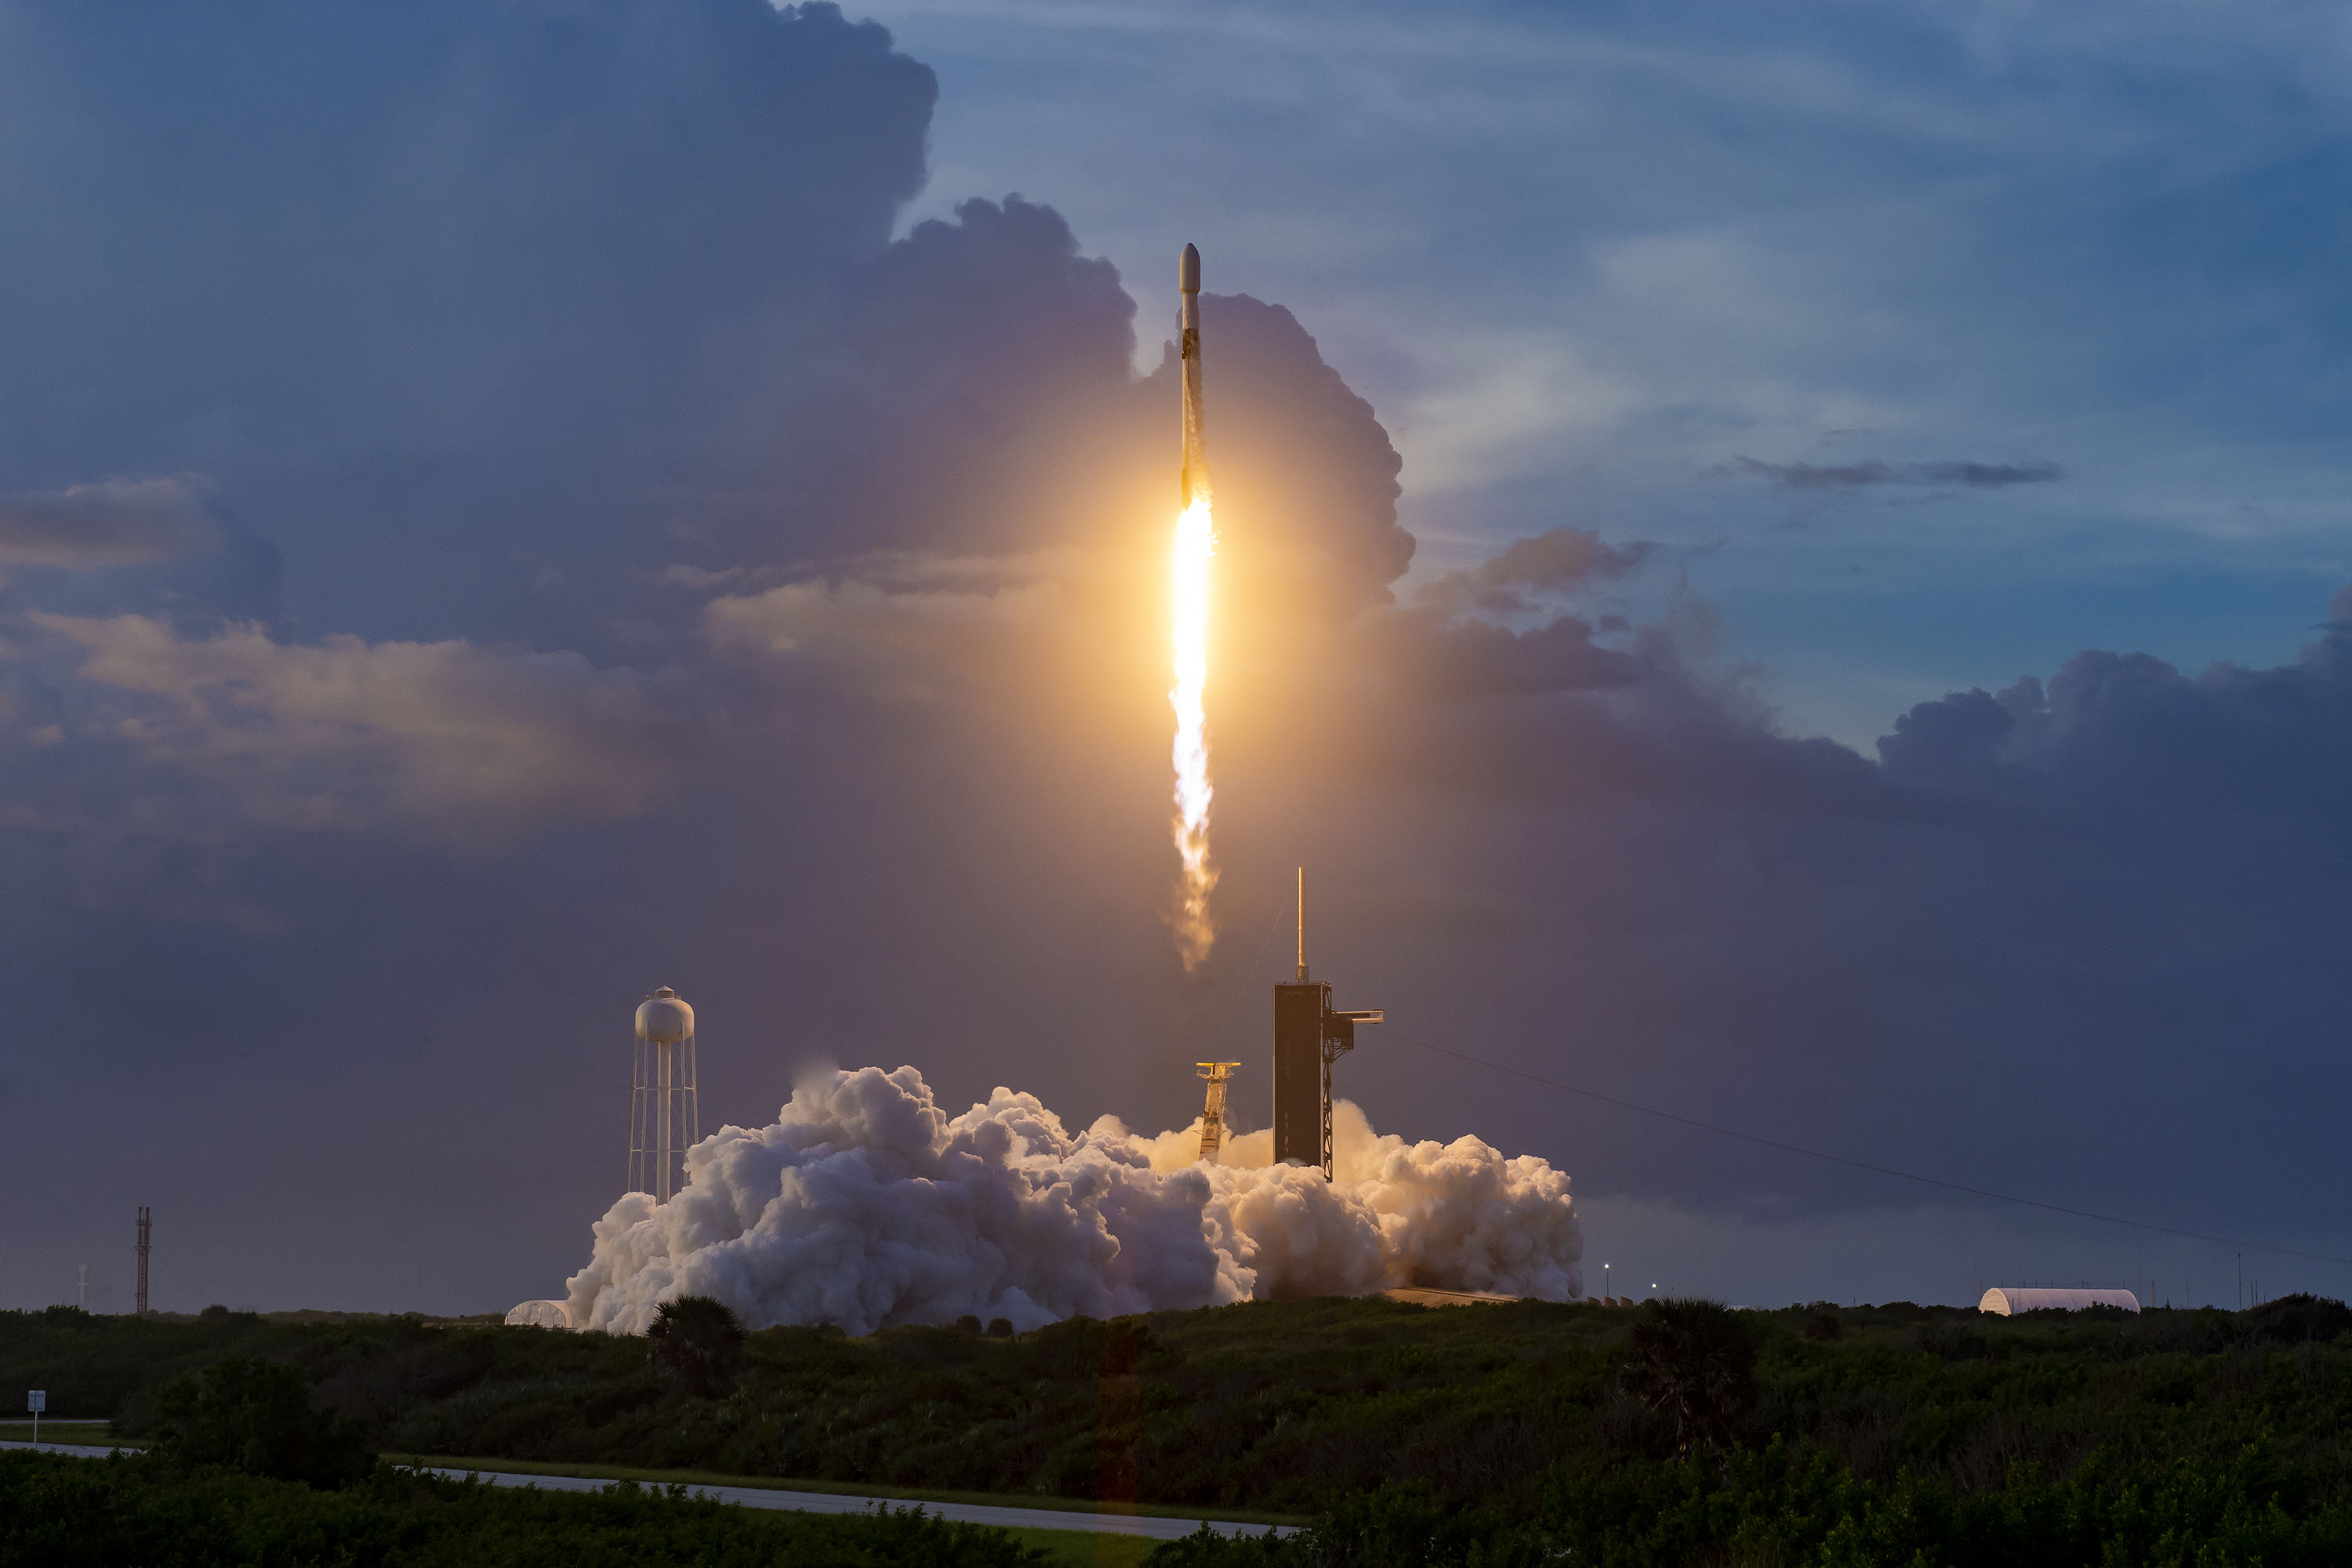 A SpaceX Falcon 9 rocket launches 60 Starlink Internet satellites into space from Pad 39A at NASA's Kennedy Space Center in Cape Canaveral, Florida on October 6, 2020. It was the third flight for the Falcon 9 booster.